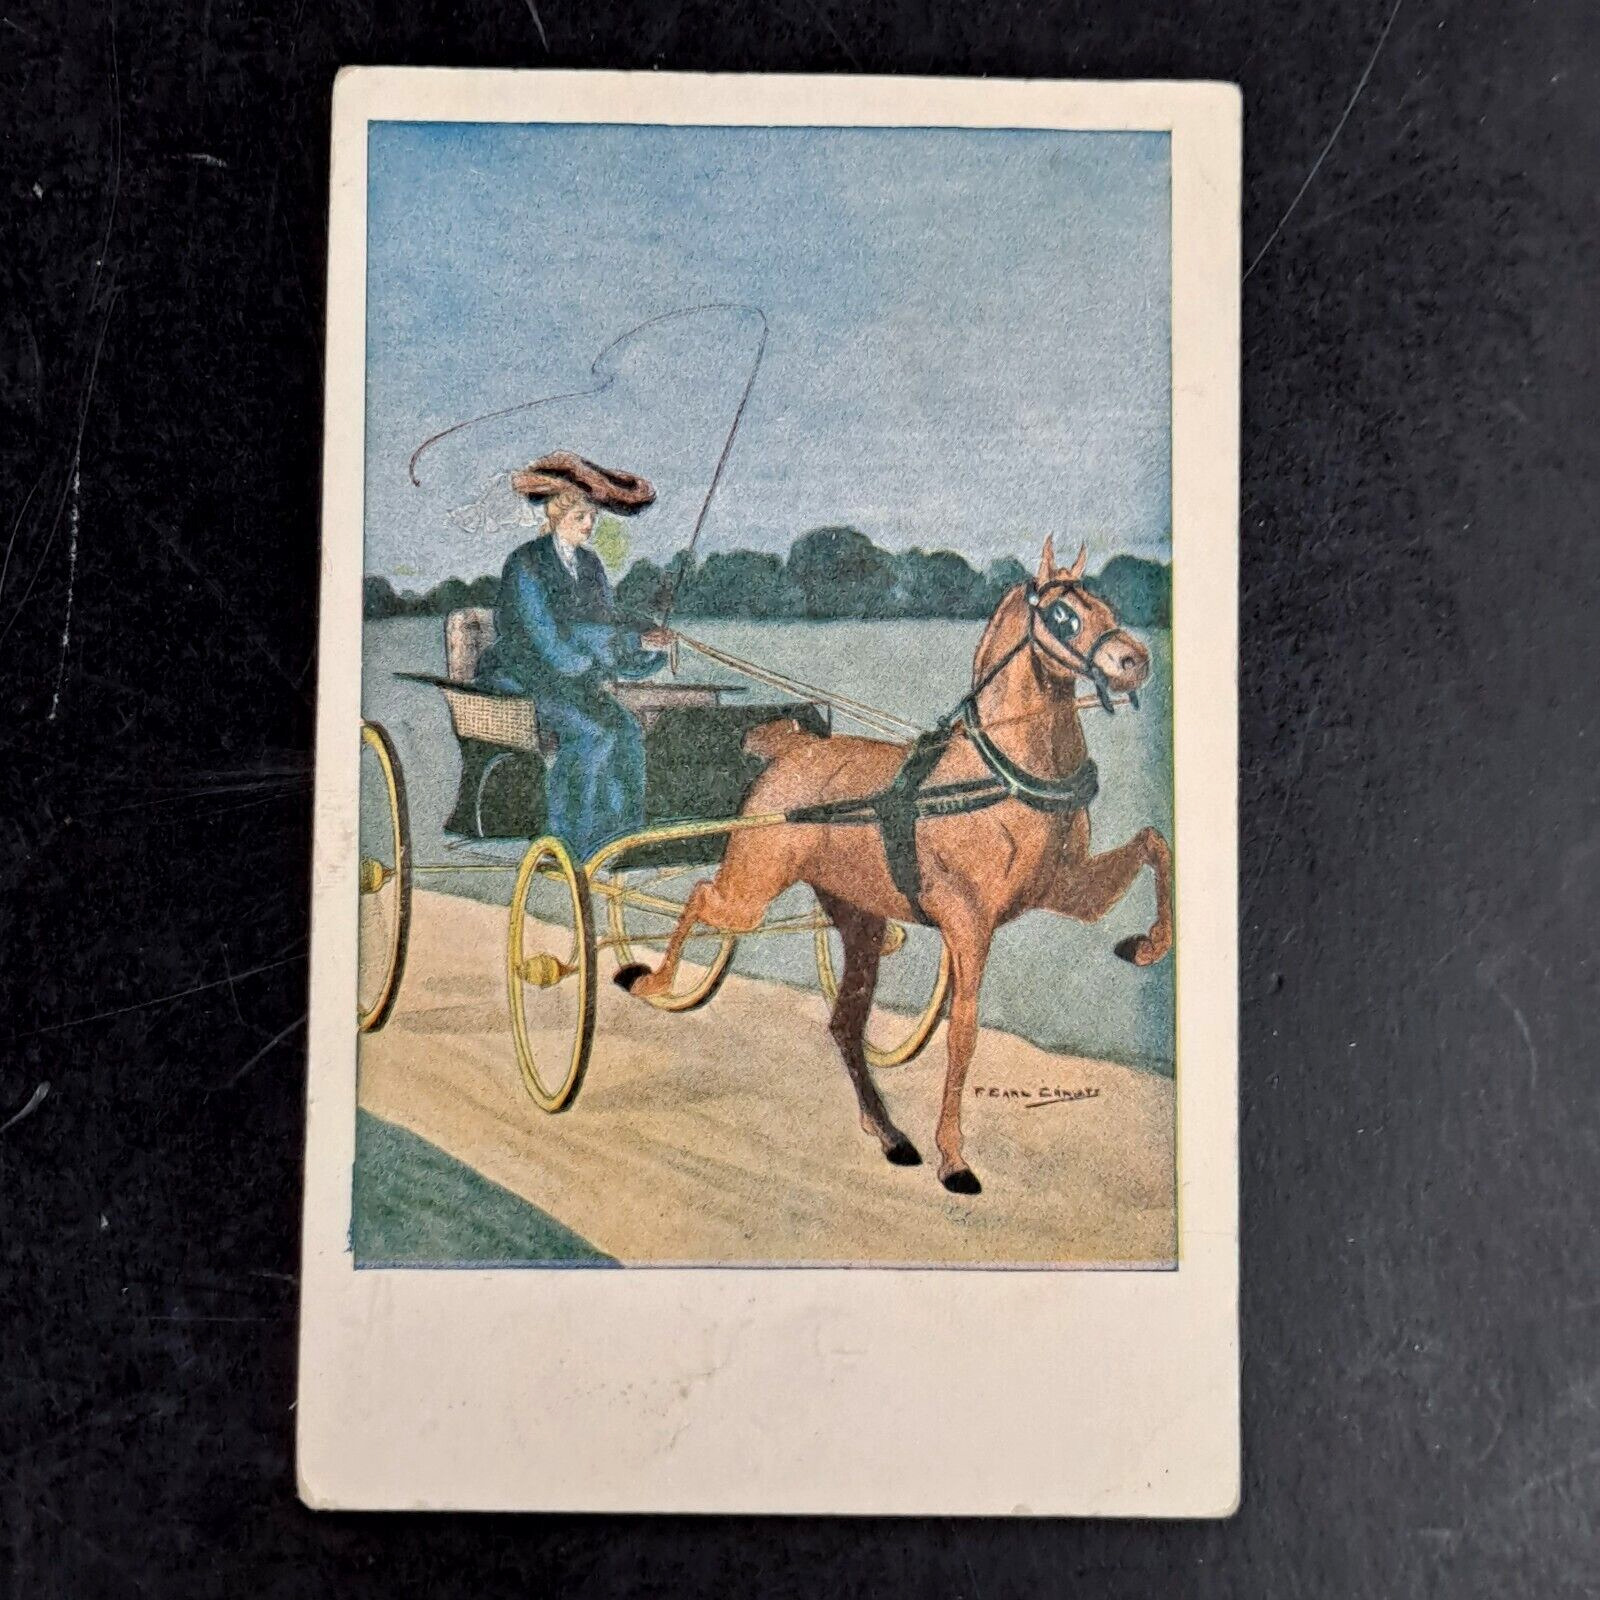 ANTIQUE 1909 DB POST CARD EARL CHRISTY SERIES NO. 577 WOMAN HORSE & CARRIAGE